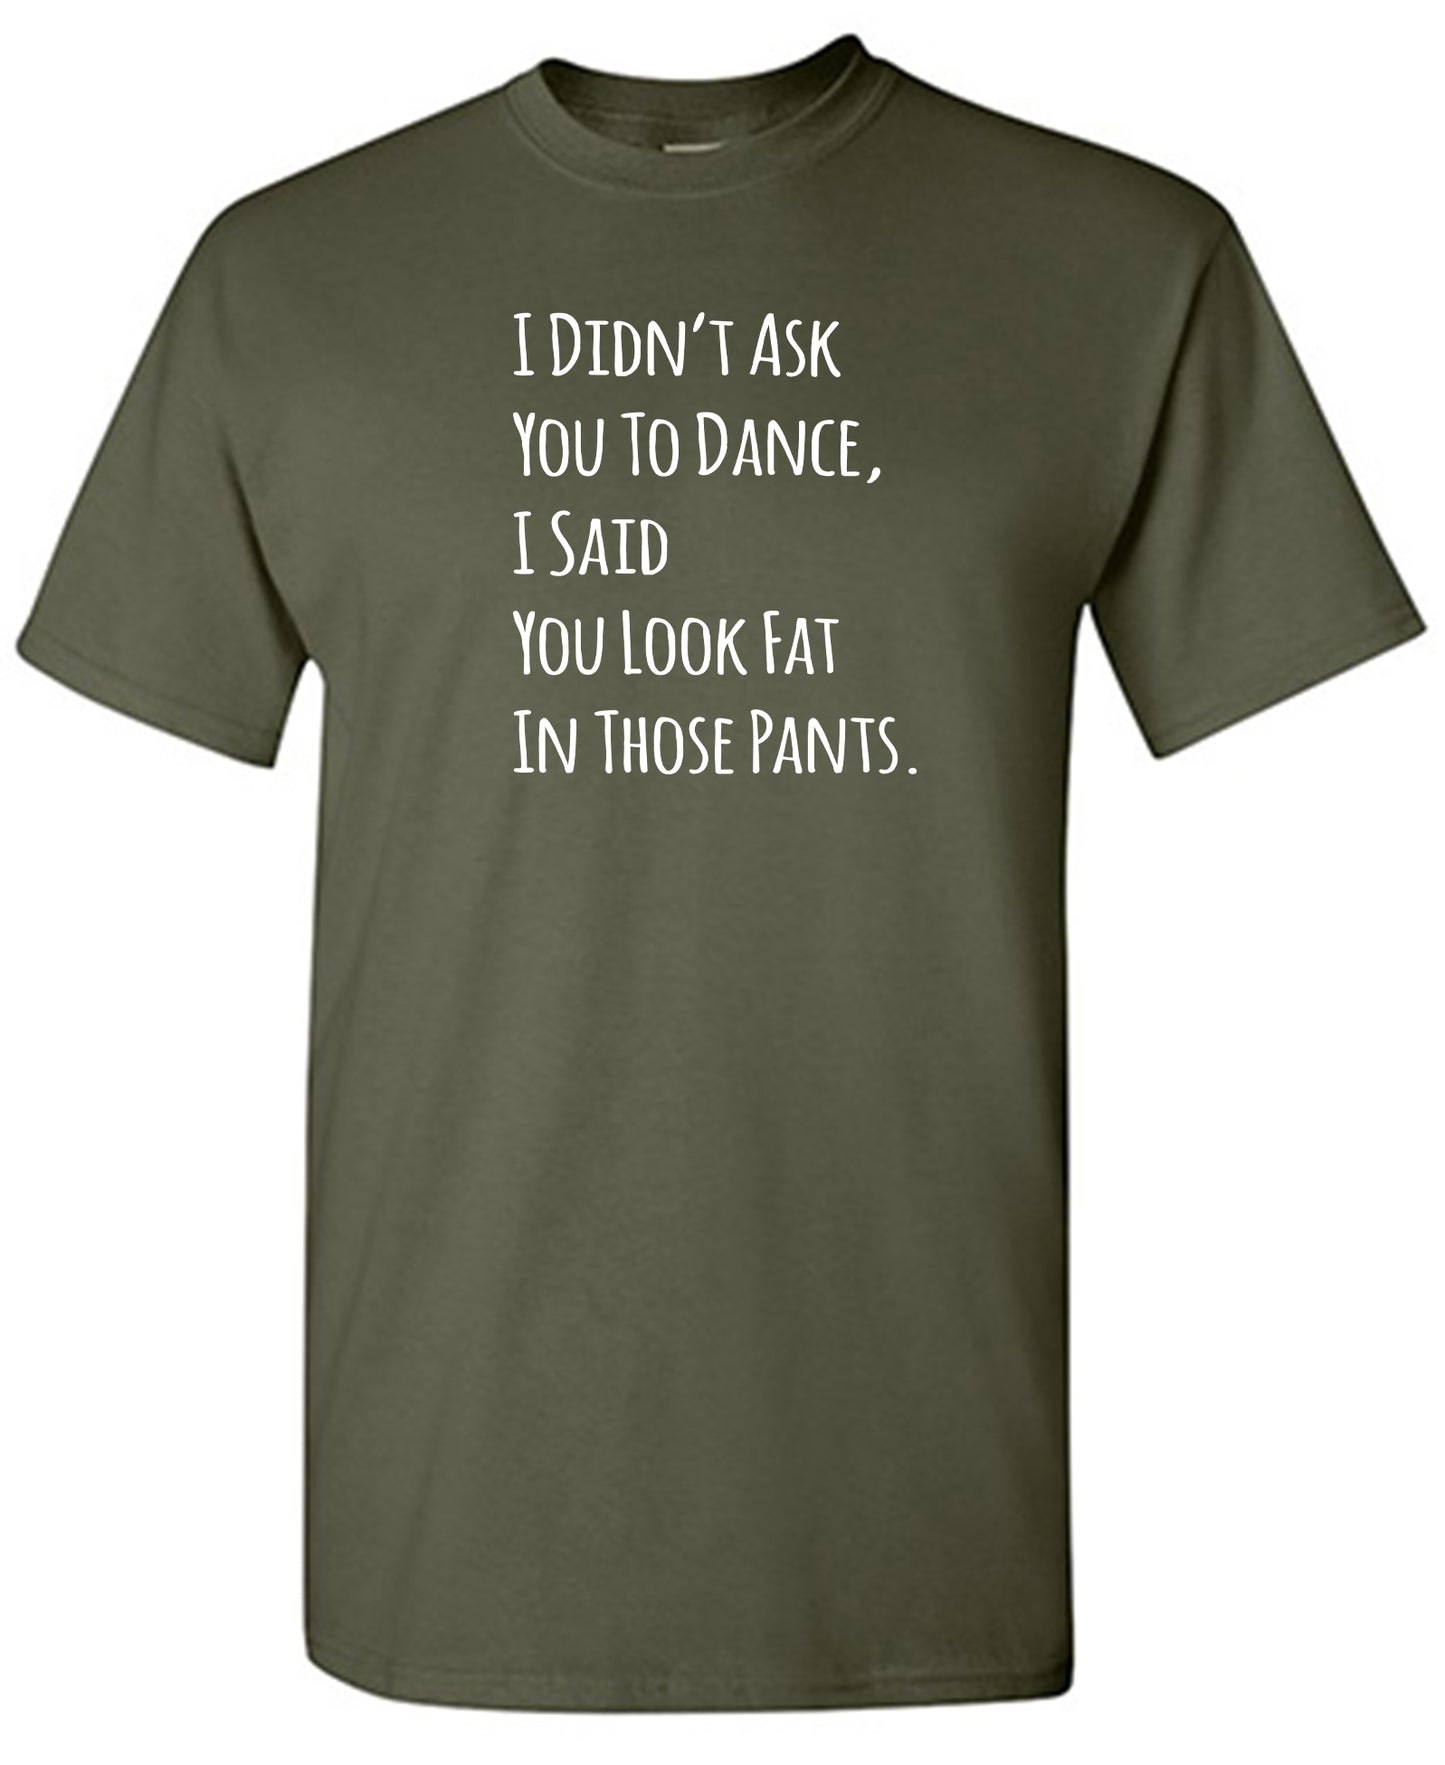 I Didn't Ask You To dance, I Said You Look Fat In Those Pants. - Funny T Shirts & Graphic Tees